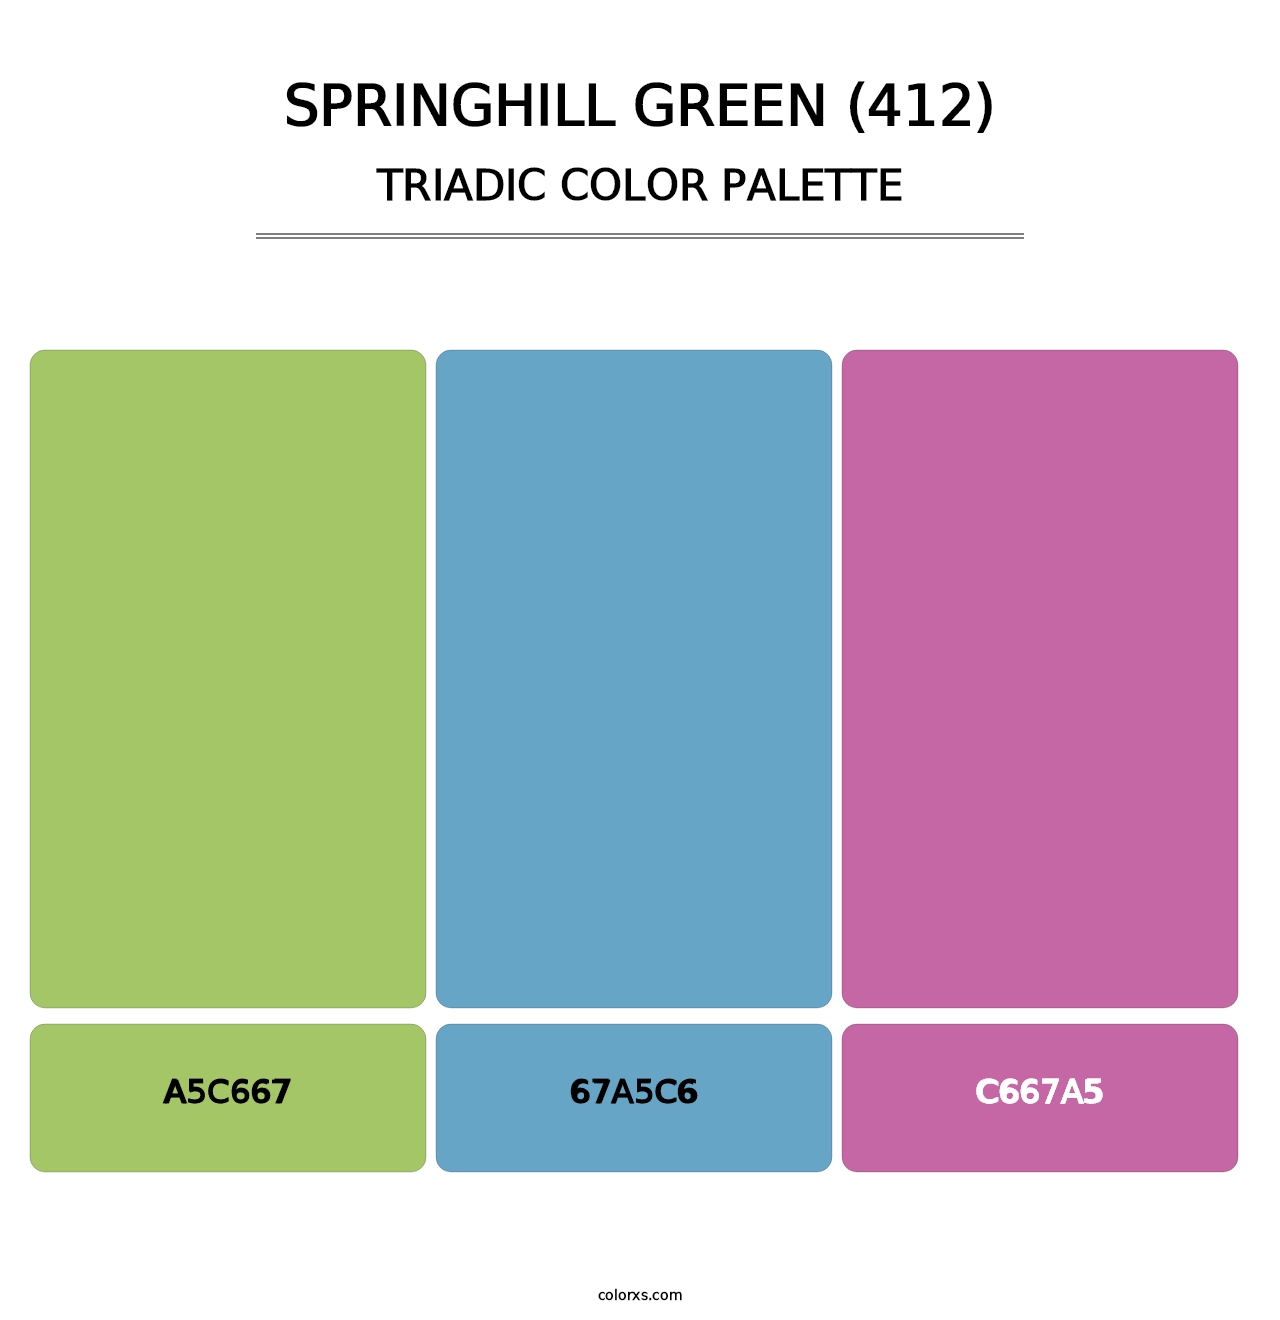 Springhill Green (412) - Triadic Color Palette